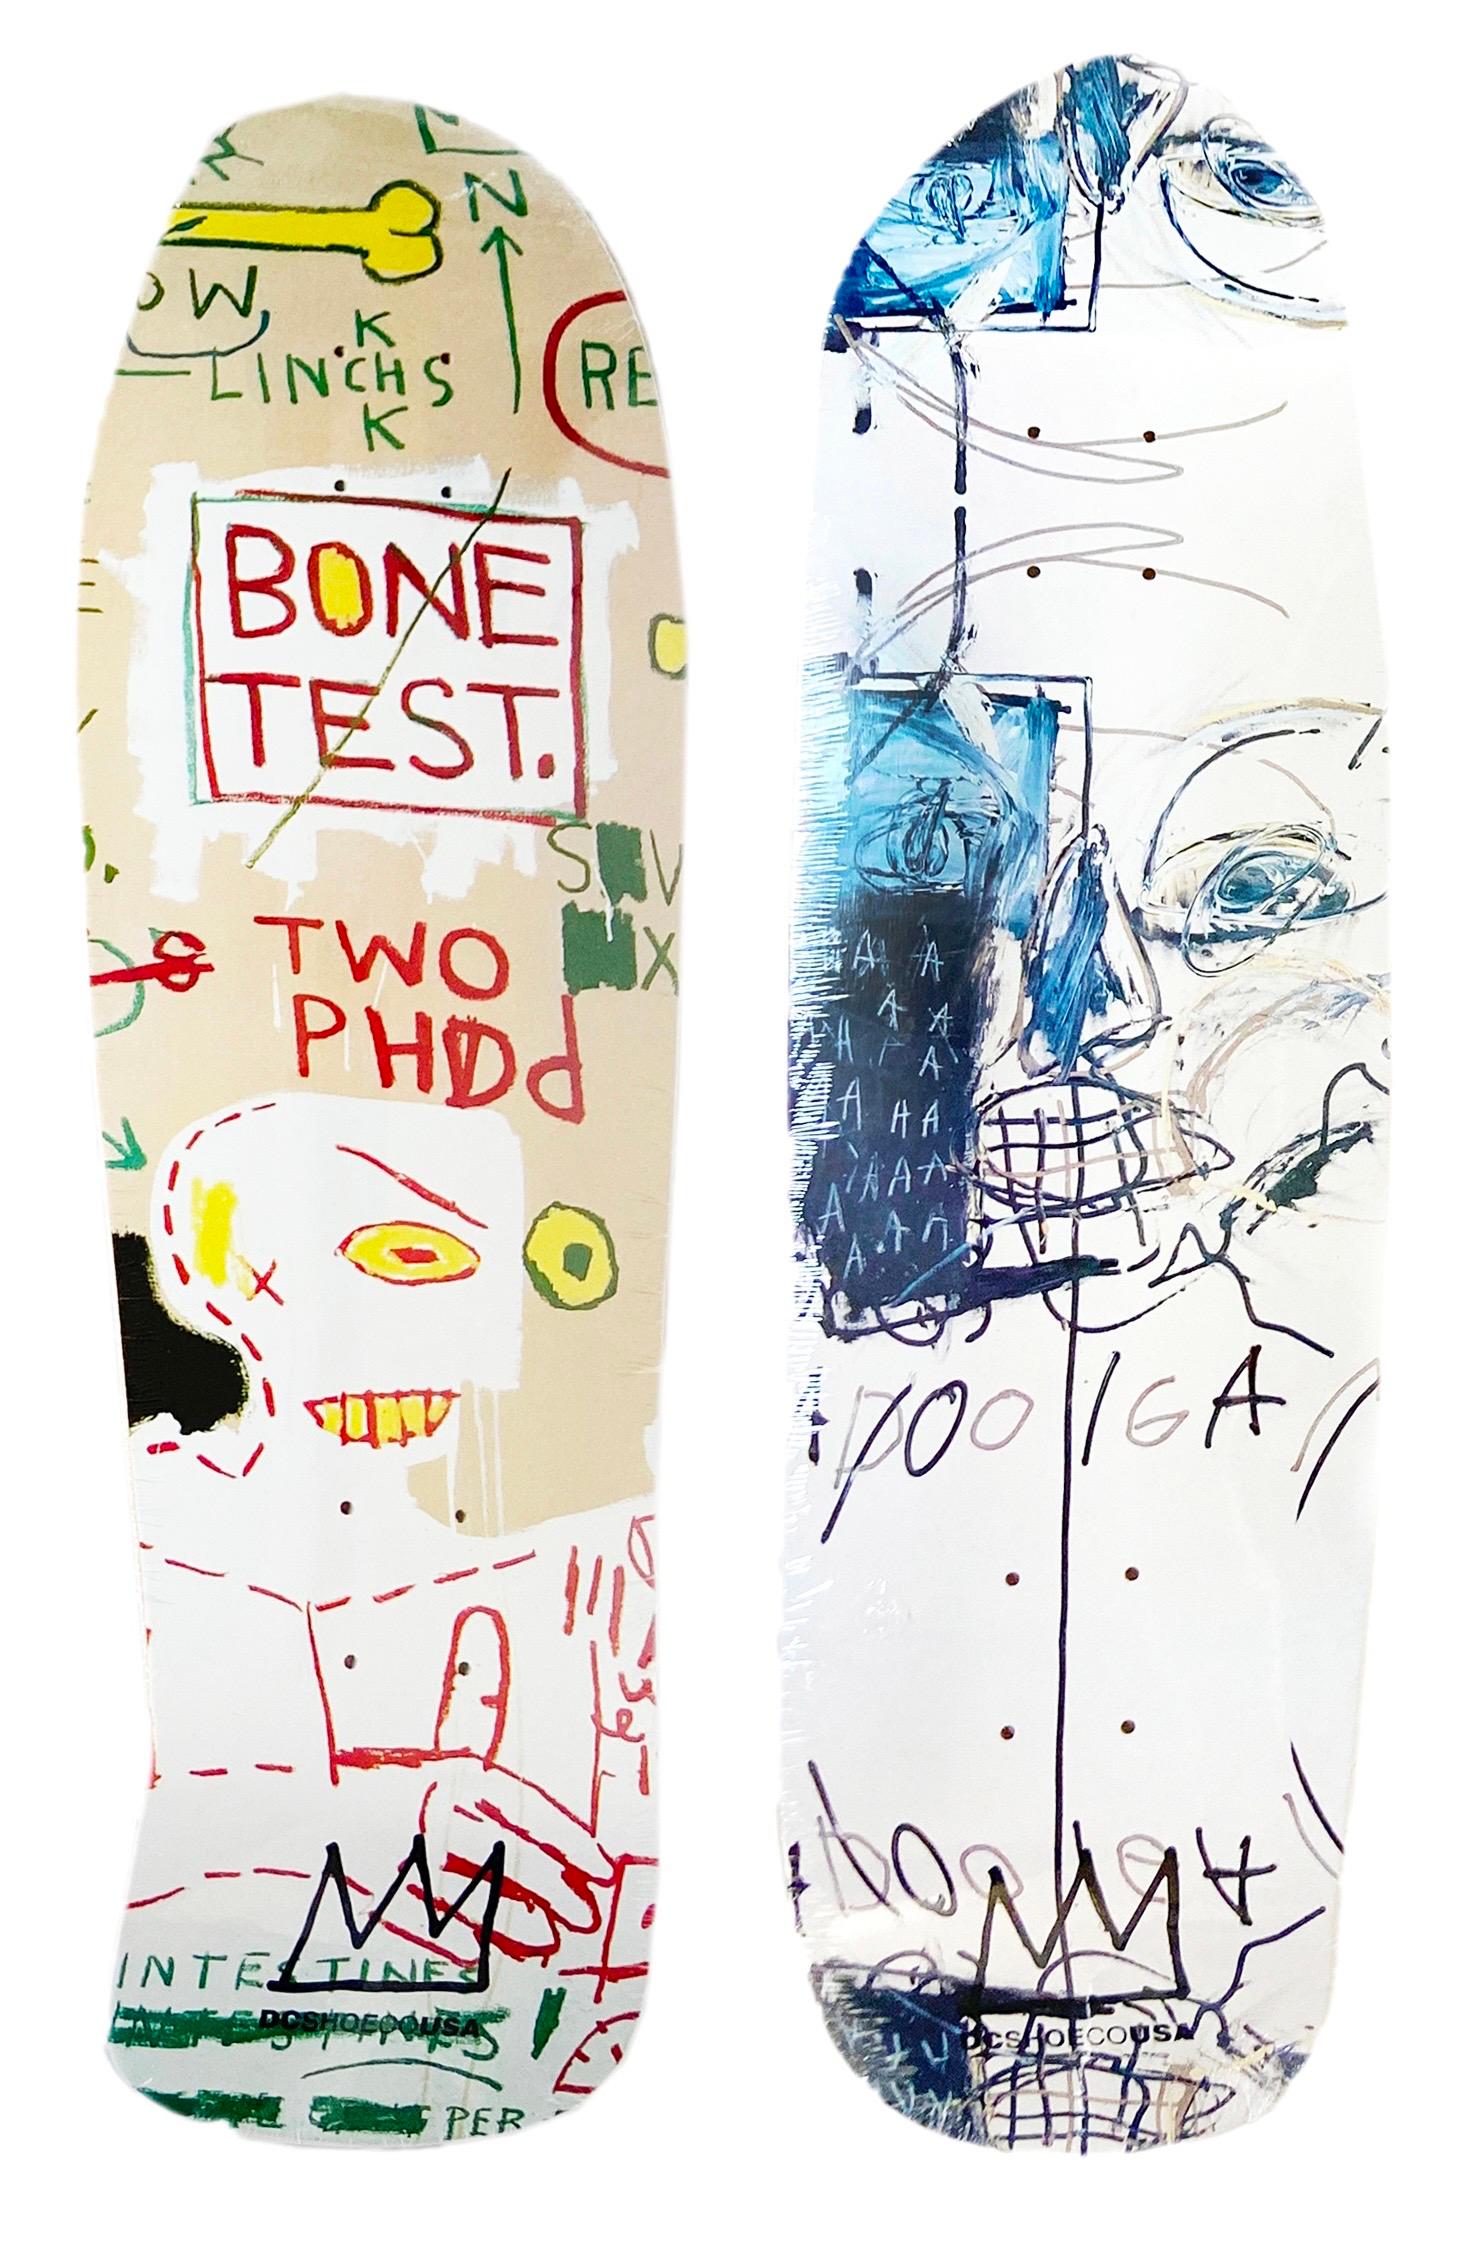 DC x Estate of Jean-Michel Basquiat set of 2 limited edition Skateboard Decks licensed by the Estate of Jean-Michel Basquiat in conjunction with Artestar in 2021, featuring offset imagery of three individual early 1980s works: Carbon ("Bone Test"),